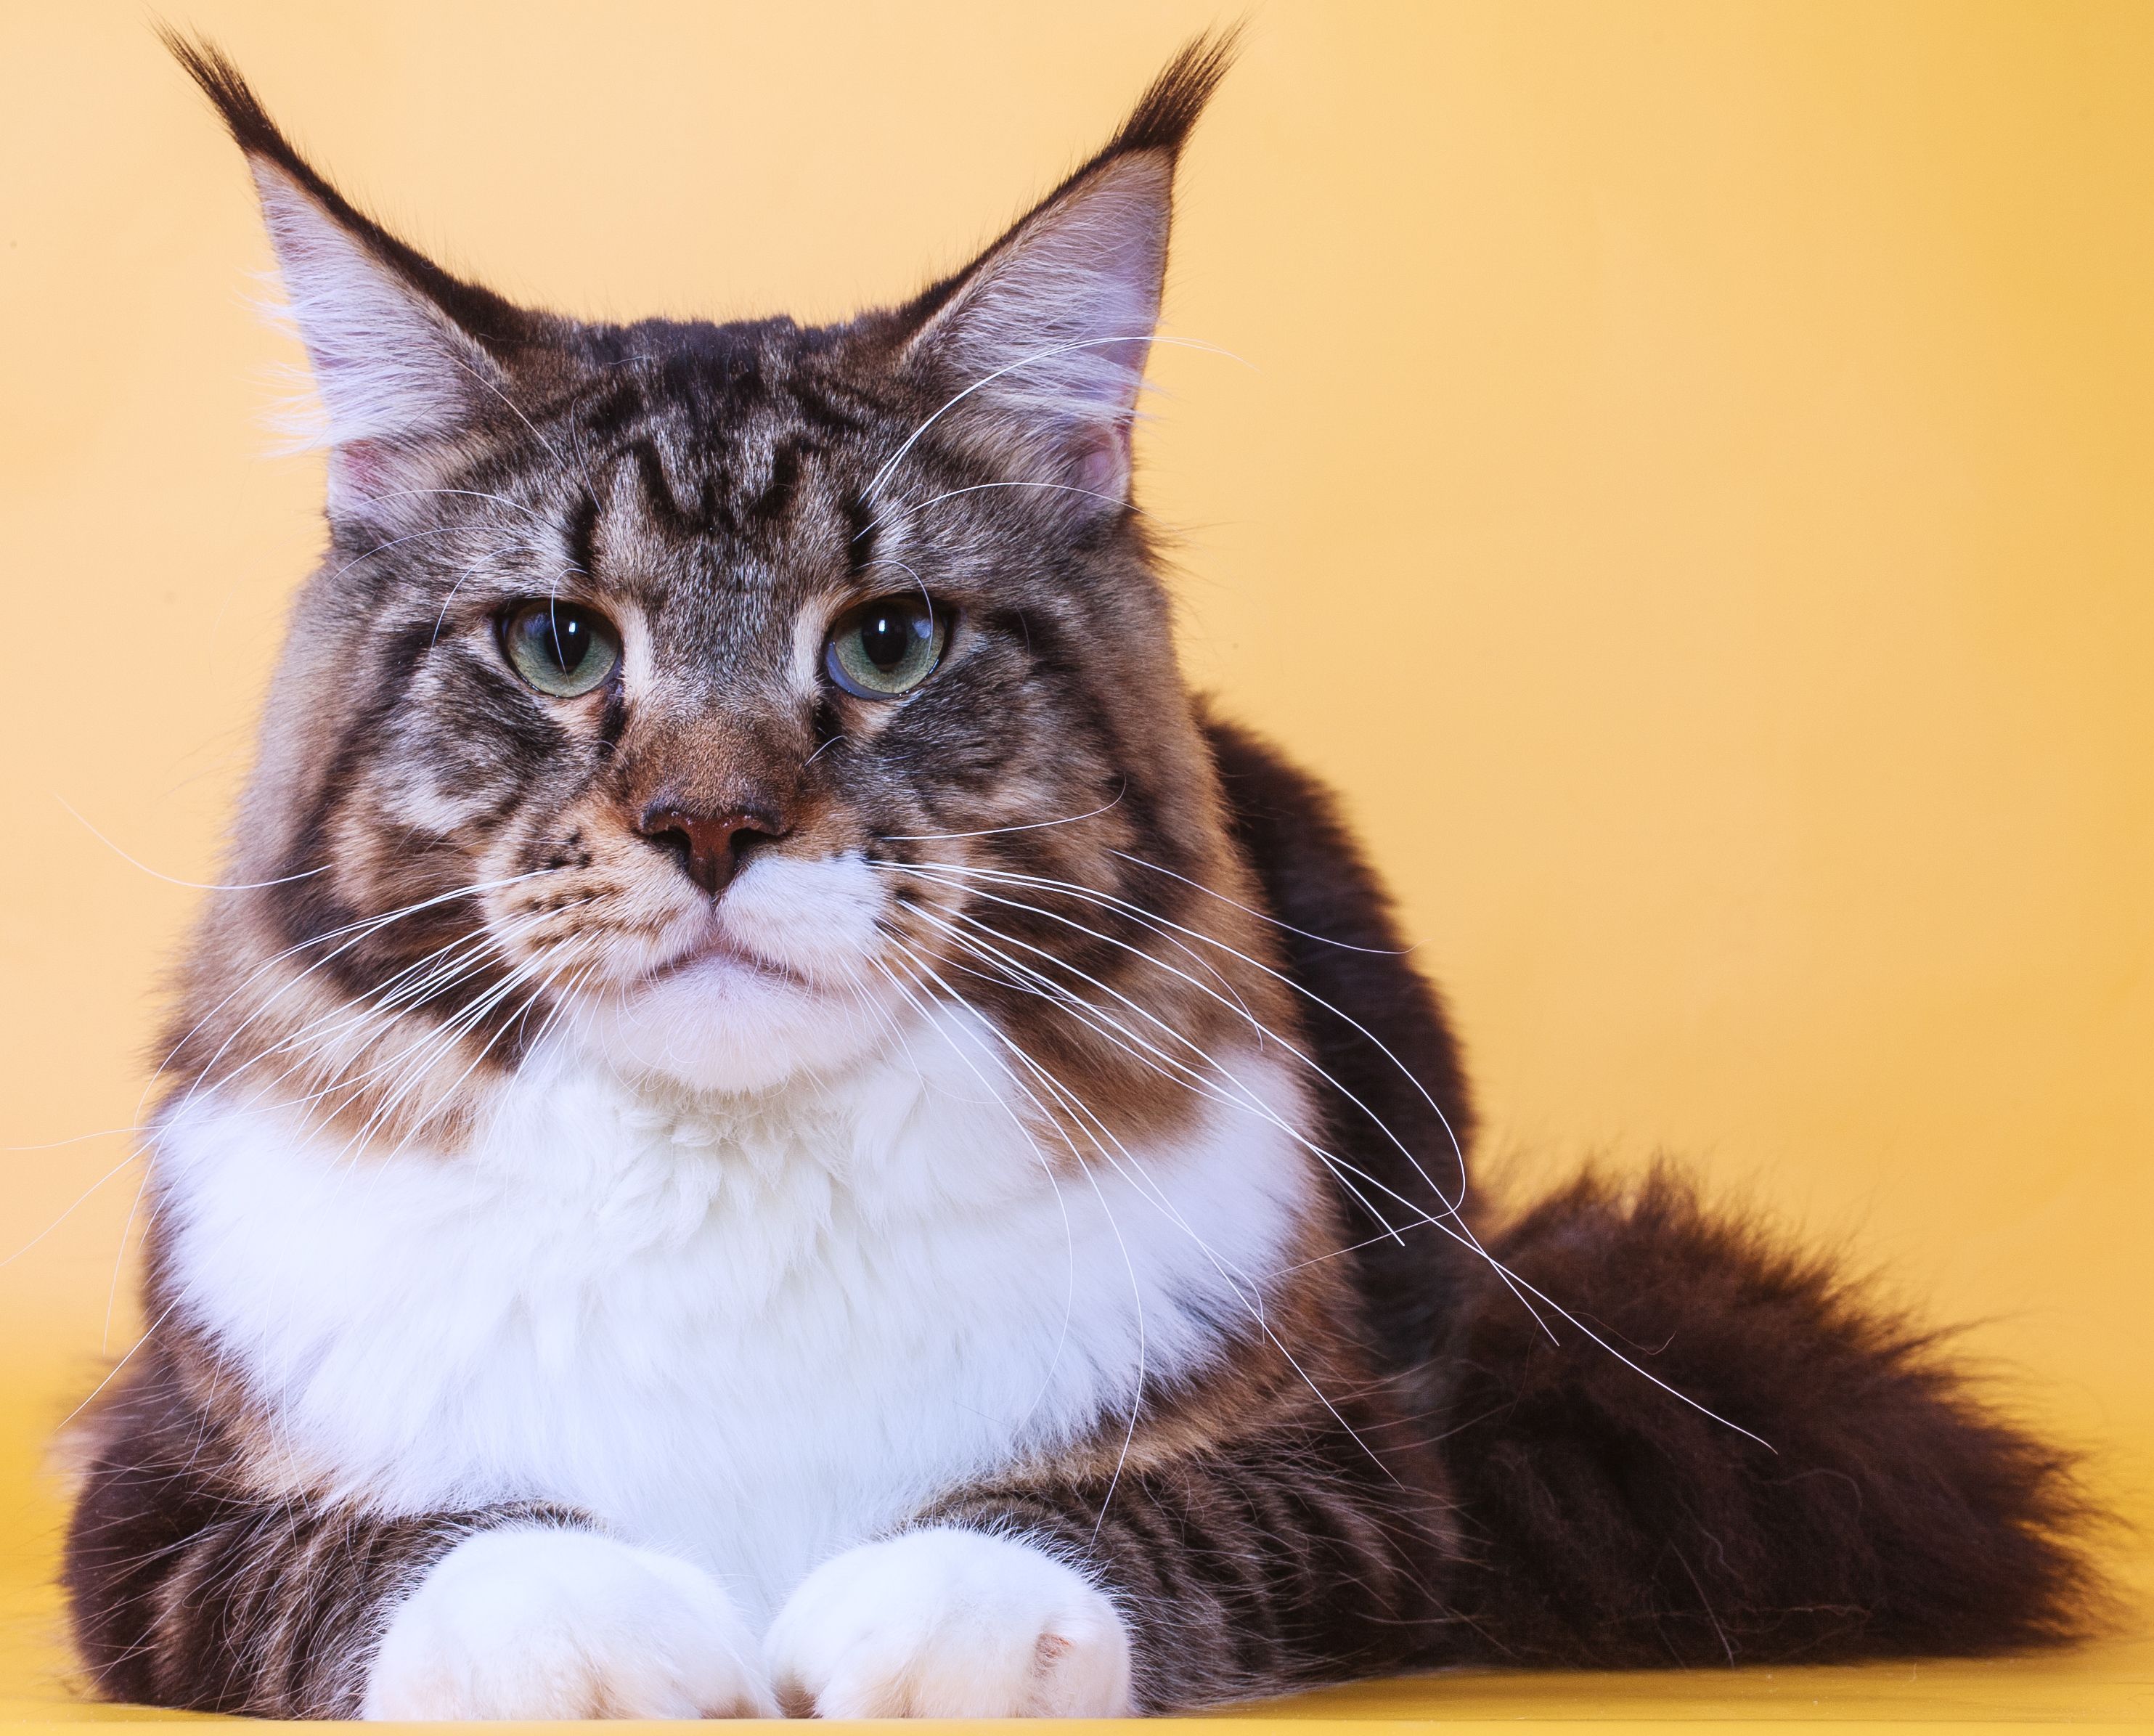 Serious Maine Coon cat on an orange background wallpapers and images wallpapers, pictures, photos